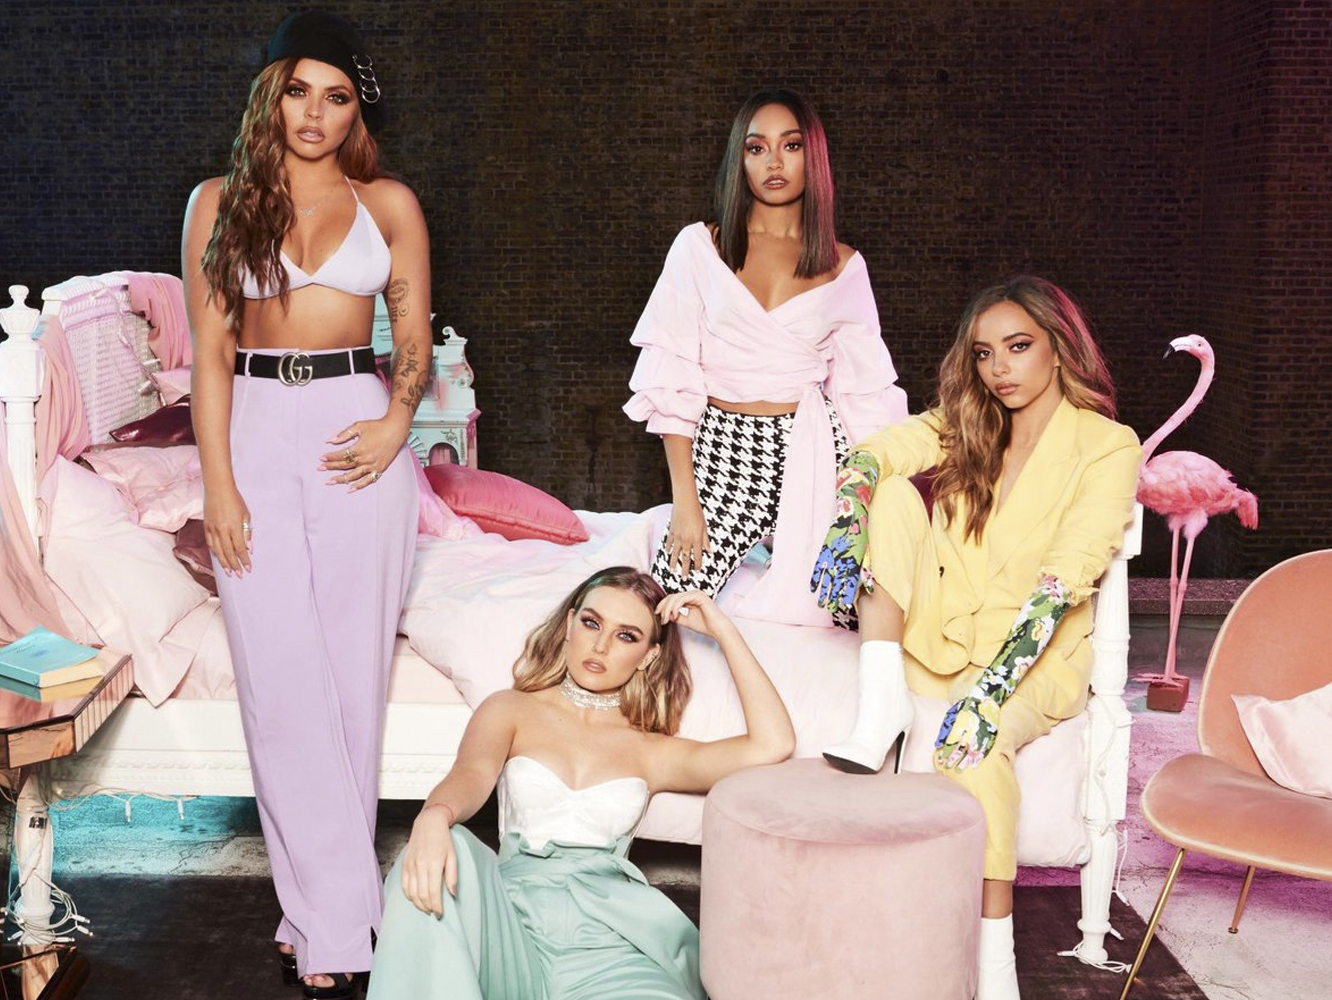  Little Mix y Cheat Codes se dan la mano en ‘Only You’, su particular ‘Anywhere’